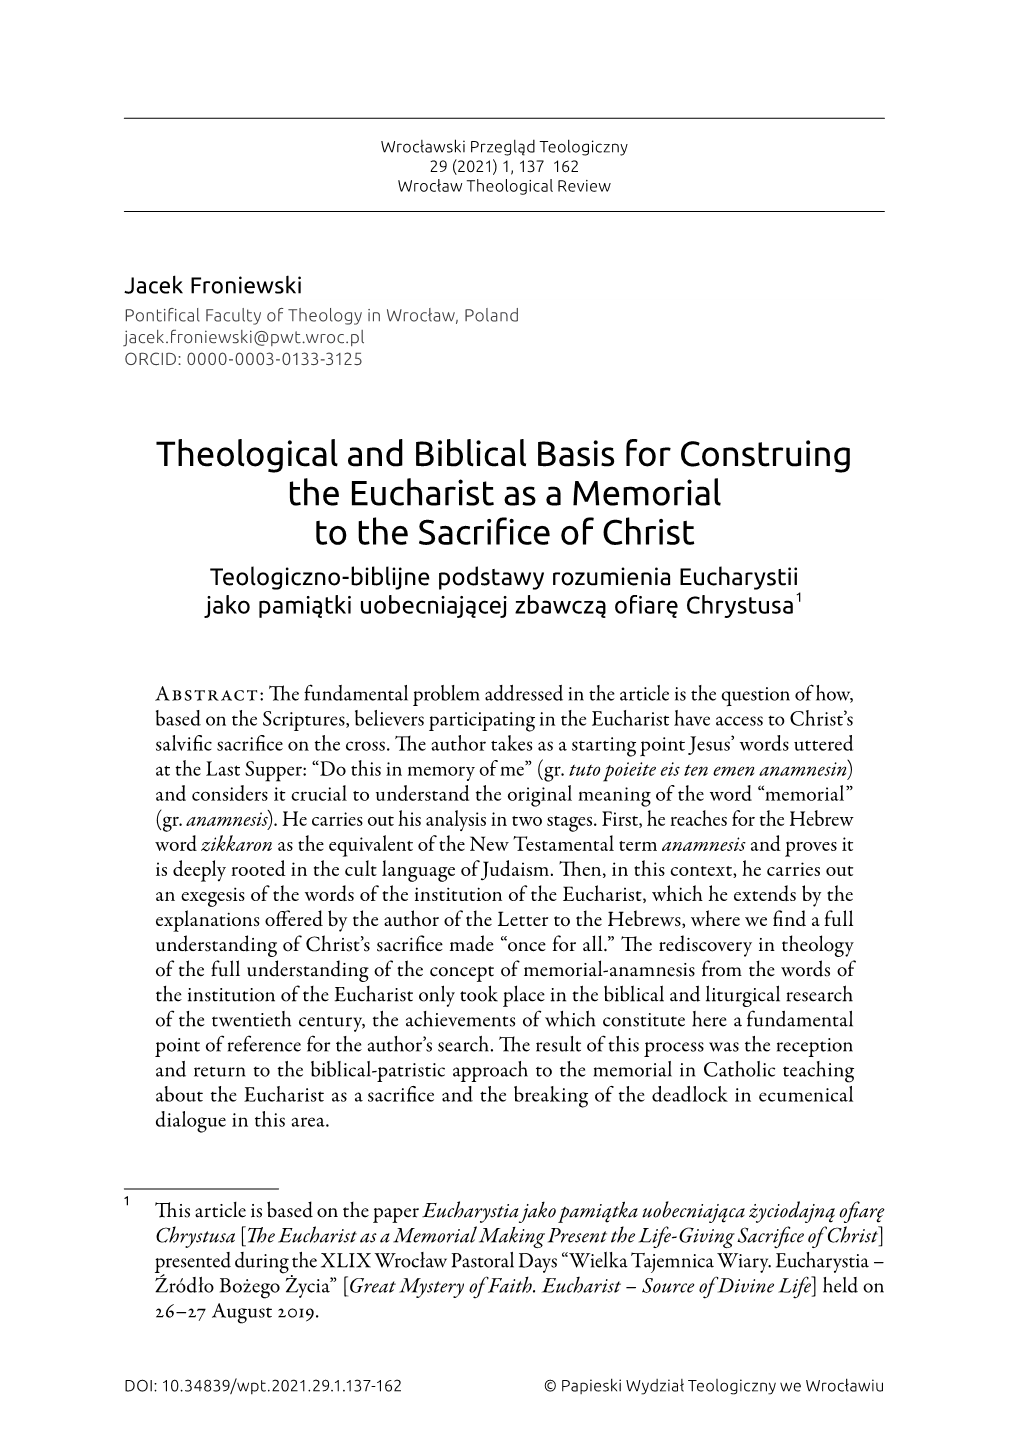 Theological and Biblical Basis for Construing the Eucharist… As a Memorial to the Sacrifice of Christ